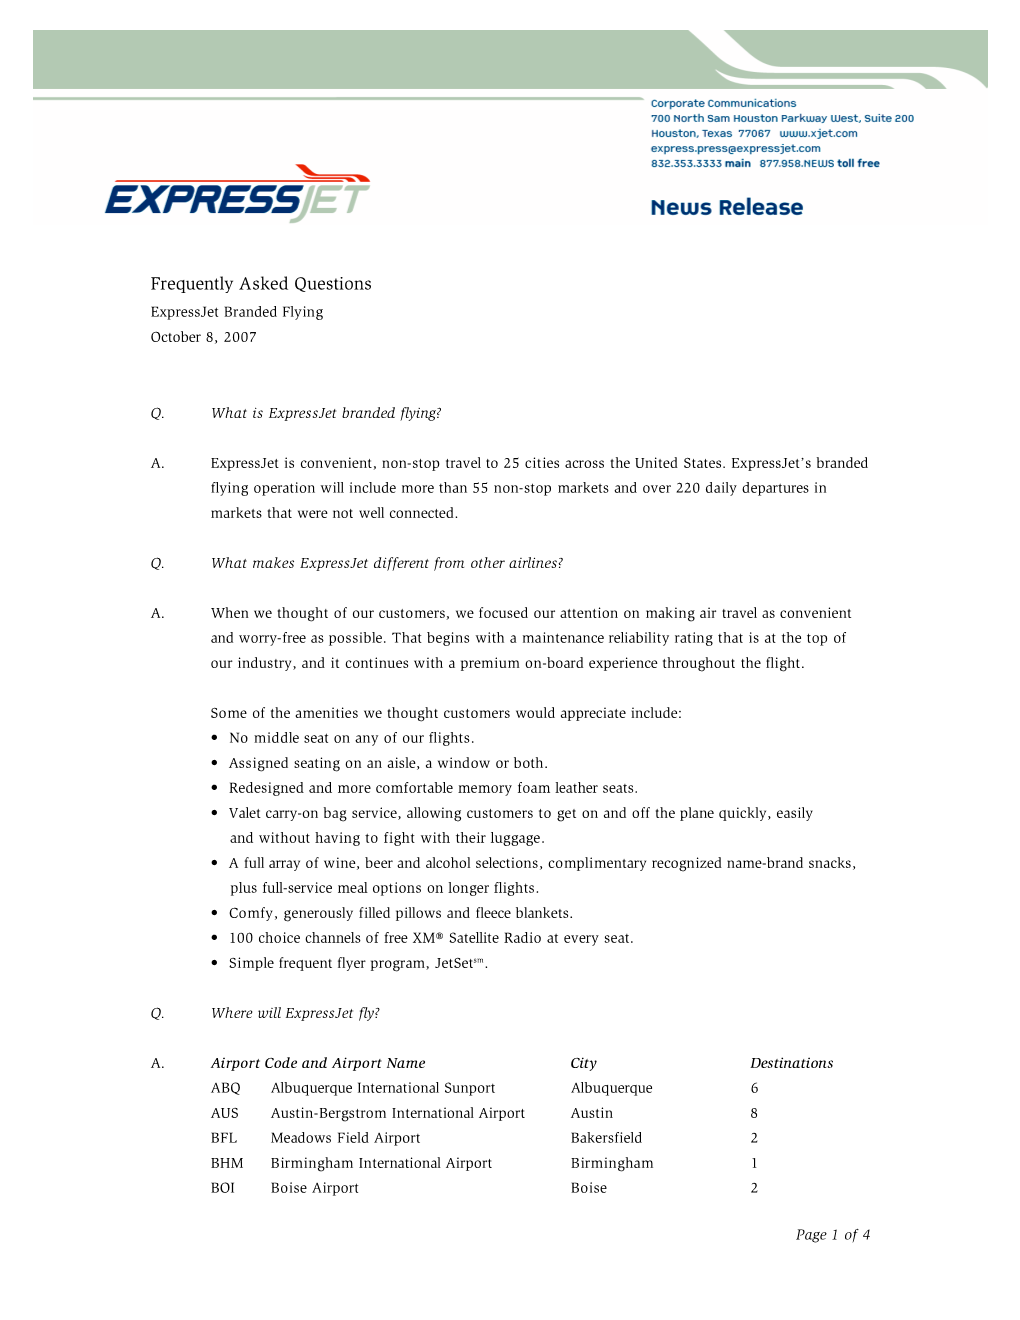 Frequently Asked Questions Expressjet Branded Flying October 8, 2007